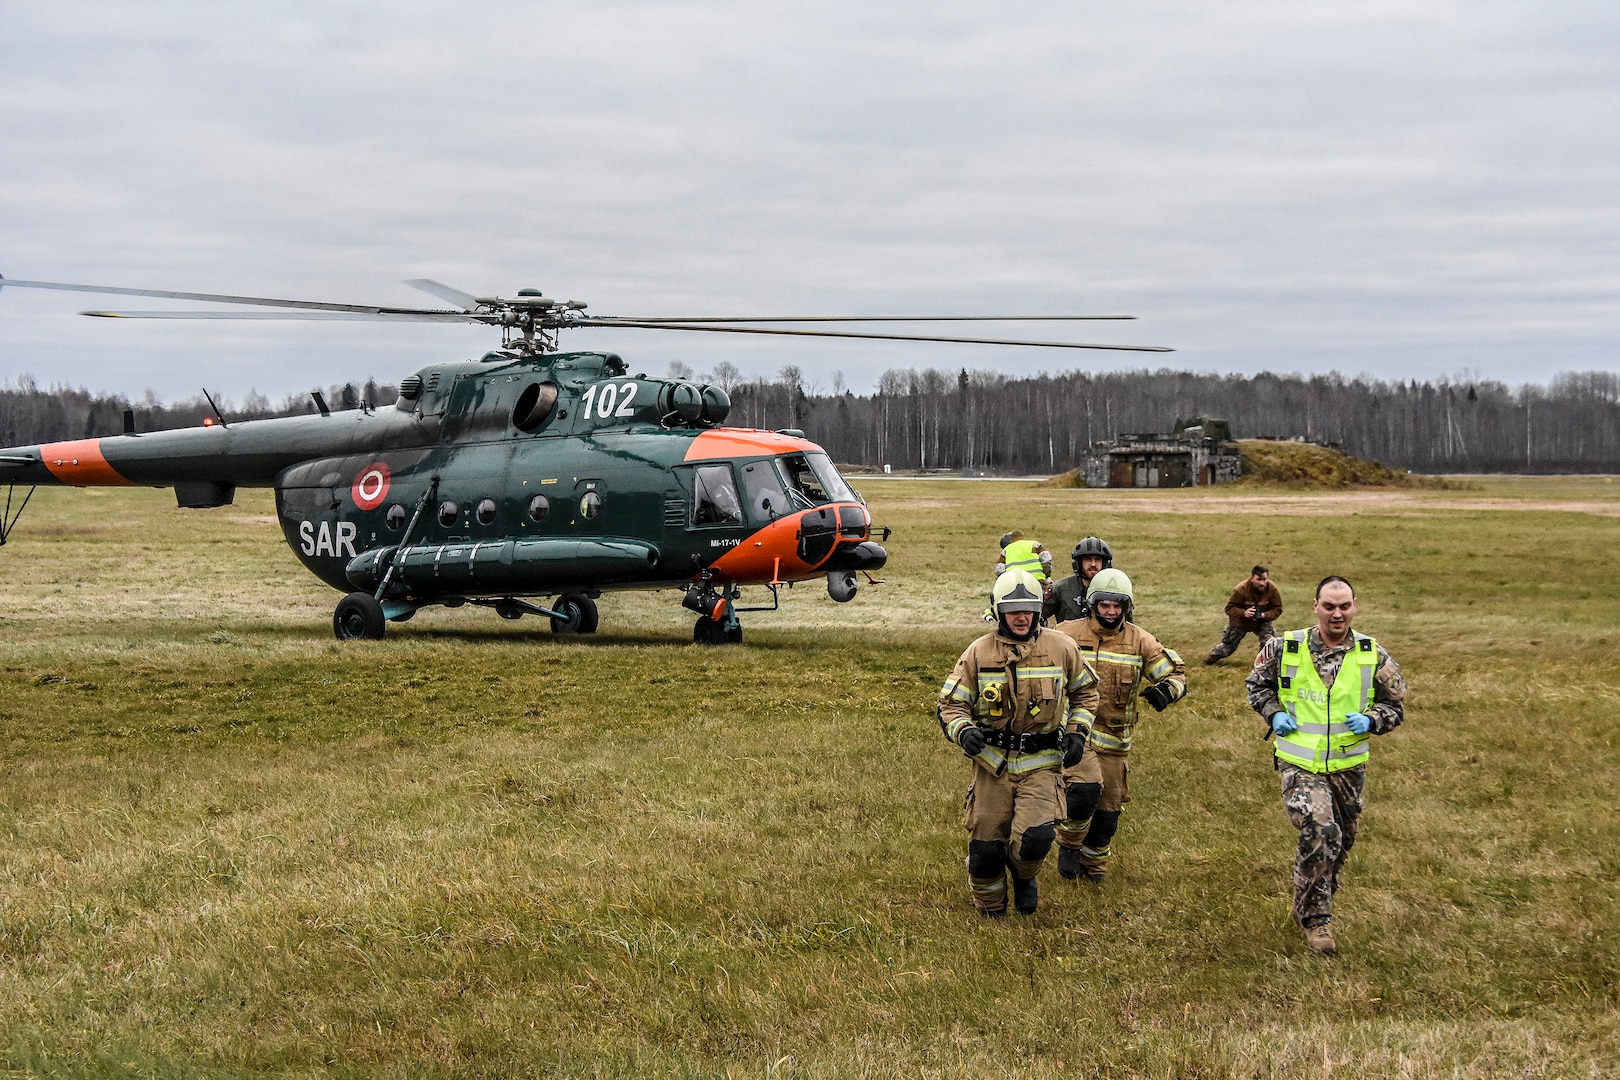 Members of the National Armed Forces of Latvia combined with Airmen from the 110th Attack Wing, Battle Creek Air National Guard Base, Mich., 127th Wing, Selfridge ANG Base, Mich., and Alpena Combat Readiness Training Center, Mich., in an emergency response drill at Lielvārde Air Base, Latvia, Nov. 16, 2018.